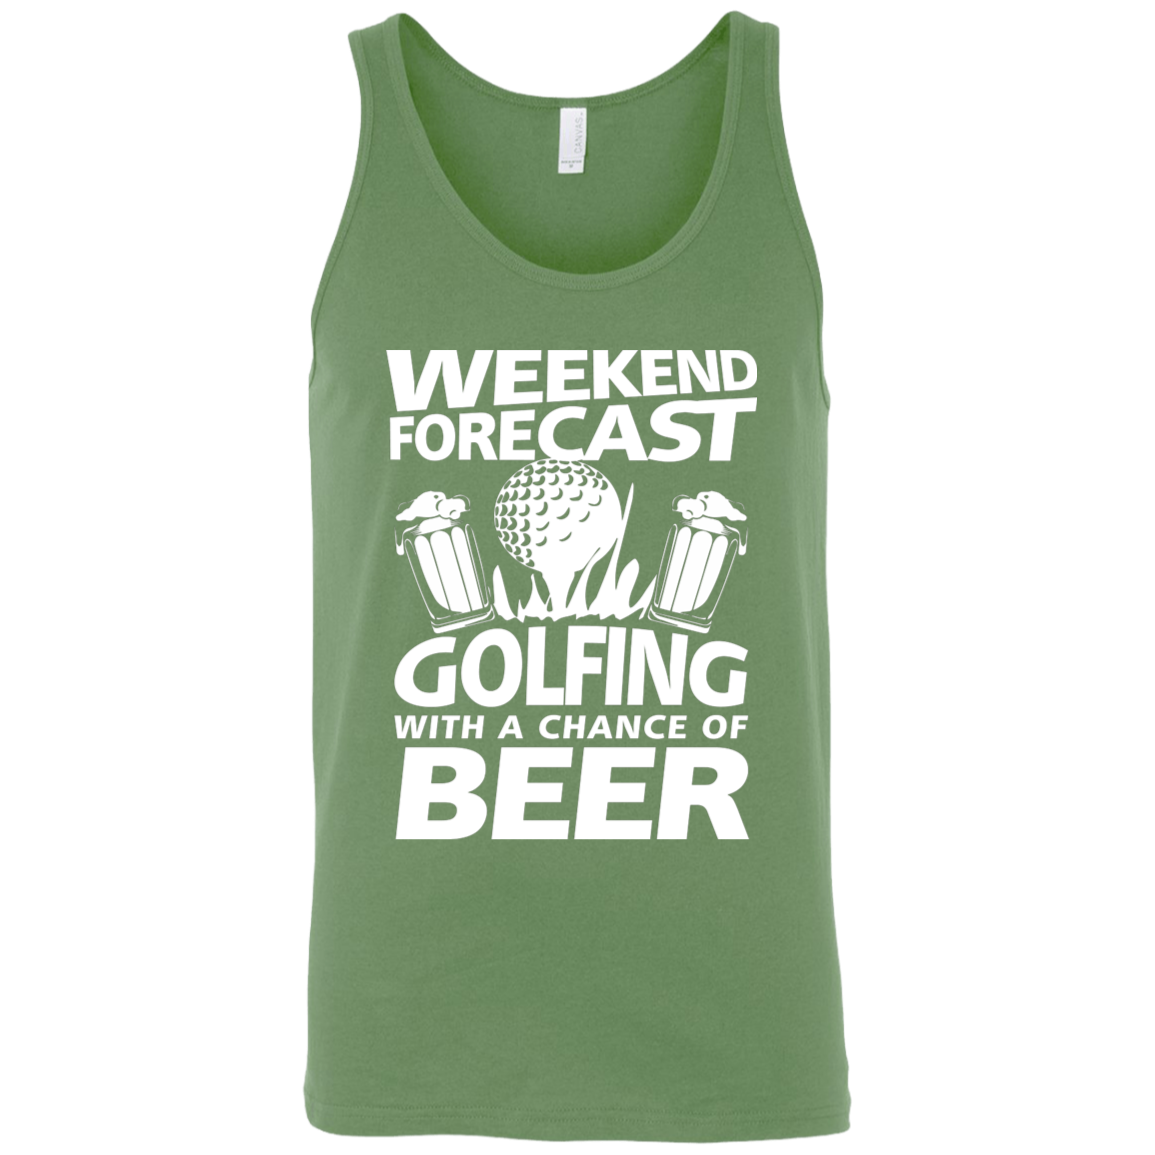 Weekend Forecast Golfing With A Chance Of Beer Tank Top Apparel - The Beer Lodge